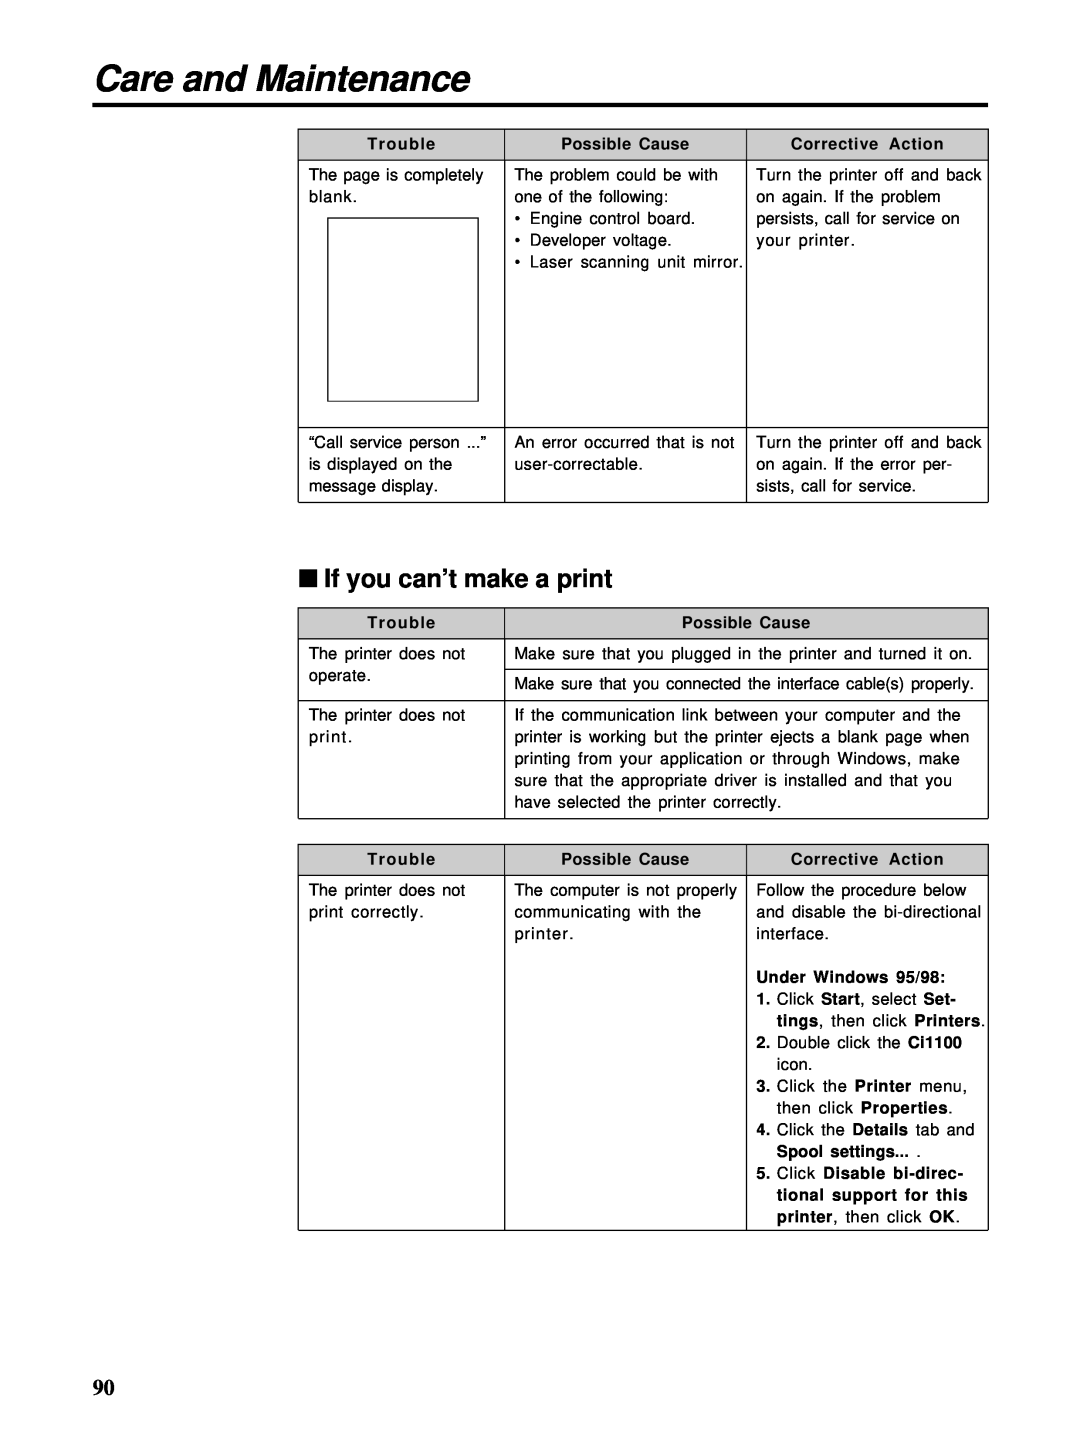 HP Ci 1100 manual If you can’t make a print, Care and Maintenance 